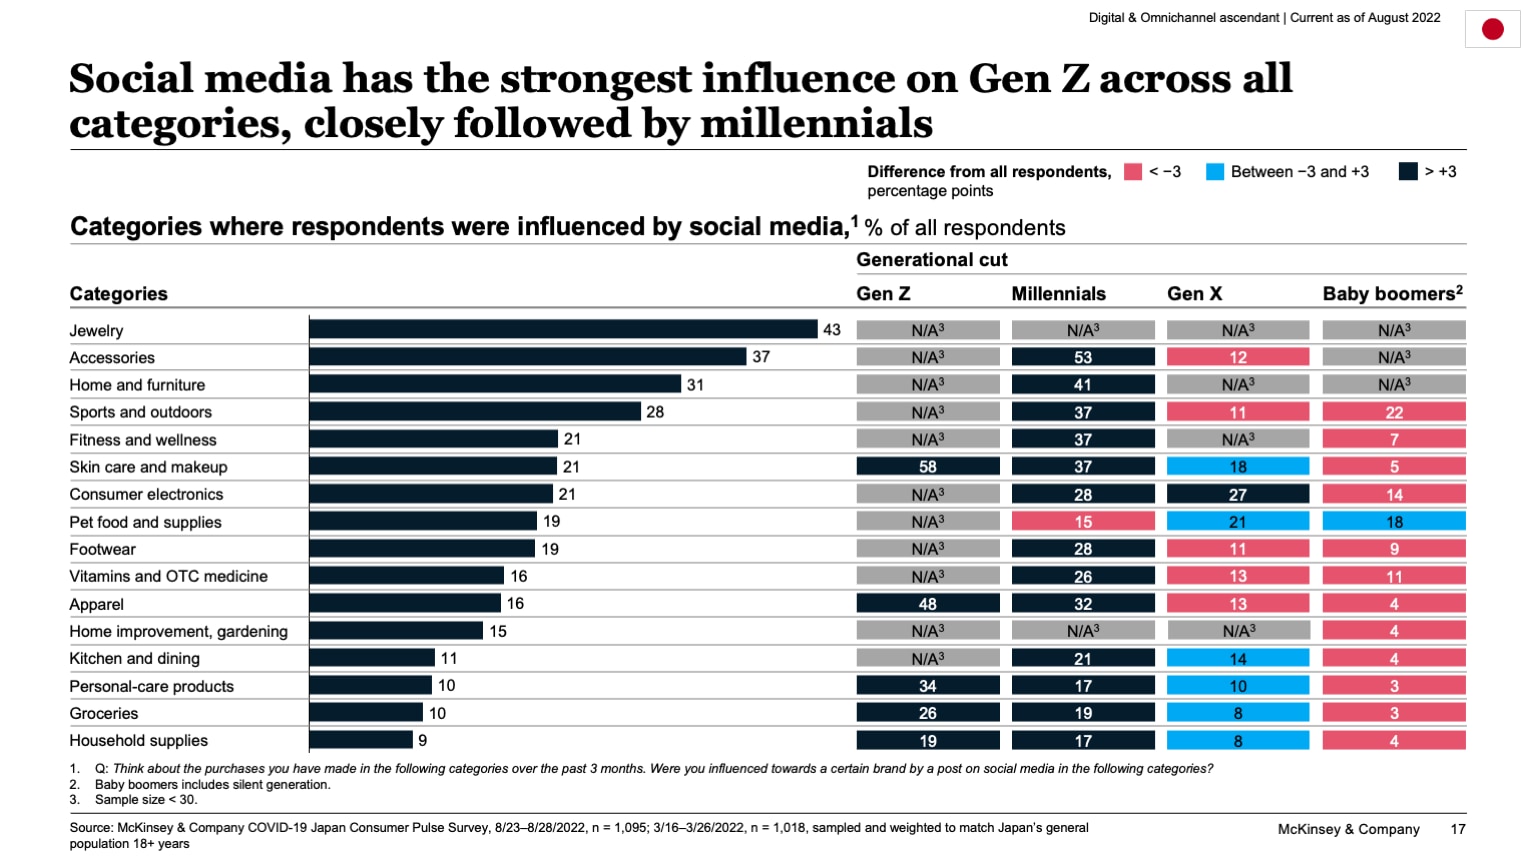 Social media has the strongest influence on Gen Z across all categories, closely followed by millennials